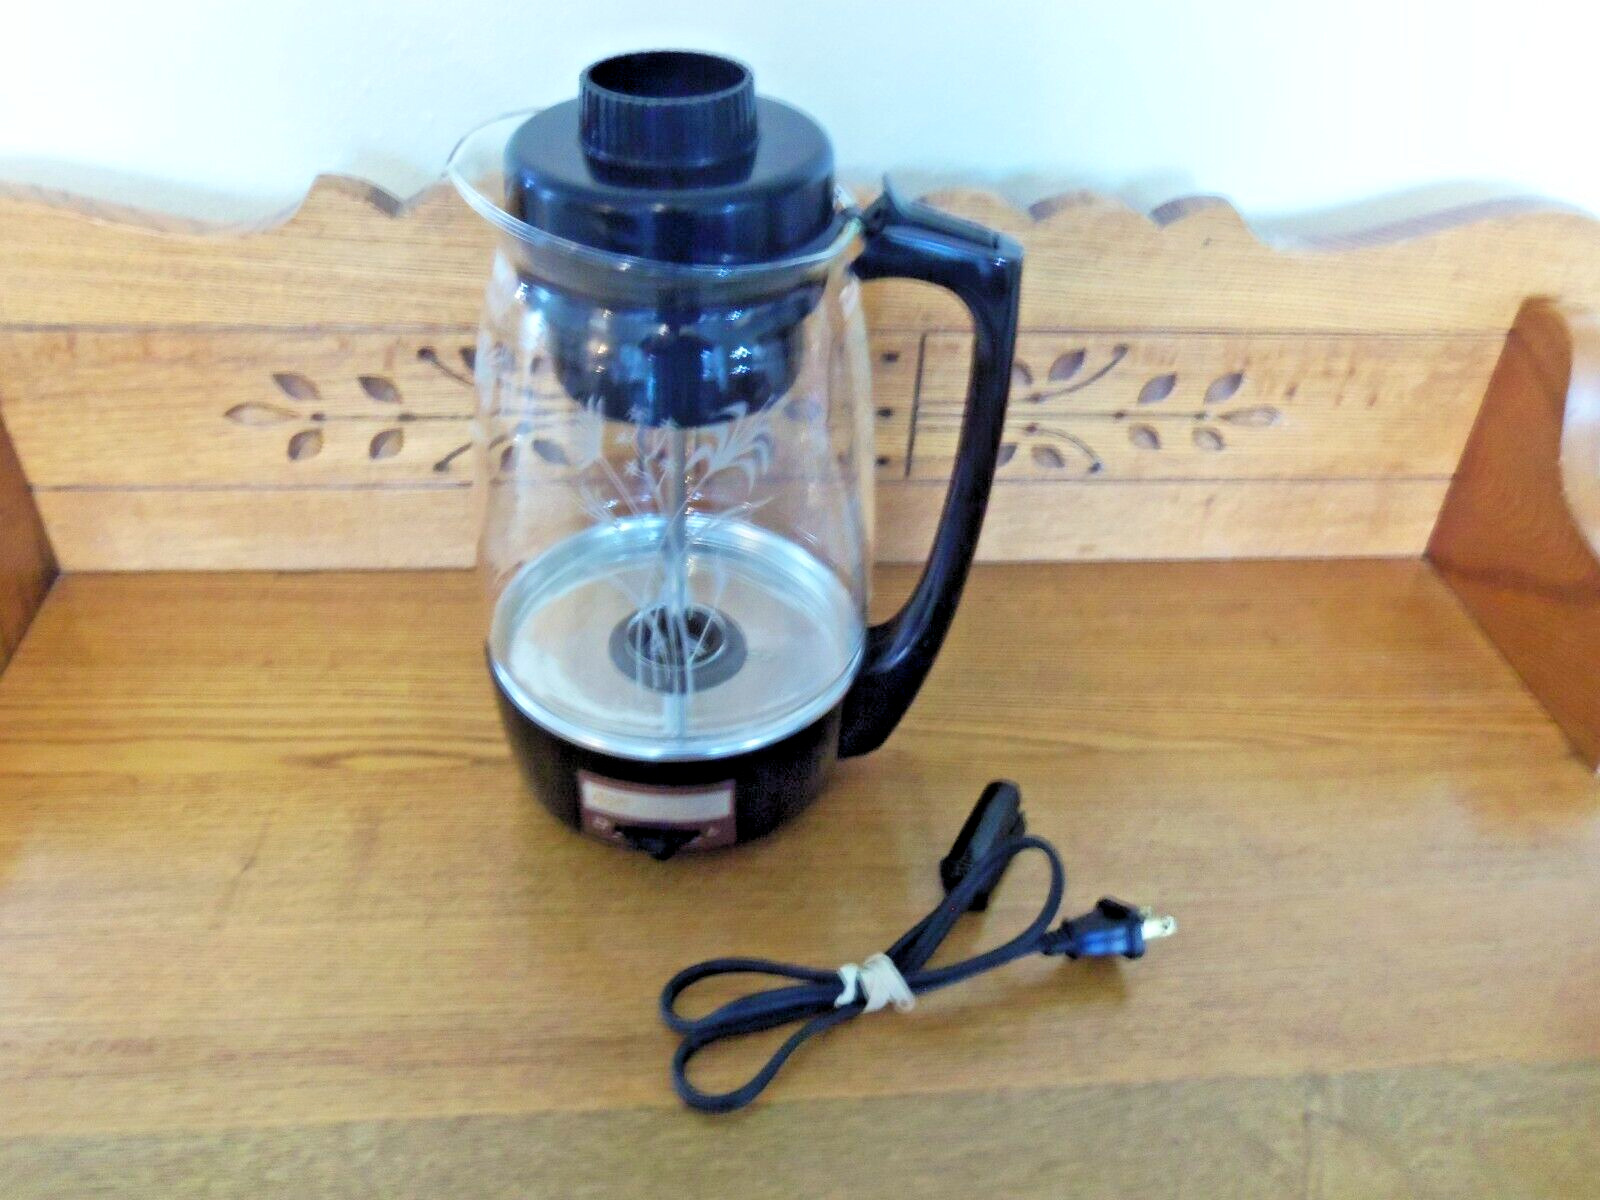 Vintage Proctor Silex Percolator 12 Cup Glass Coffee Maker Black - Tested/Works